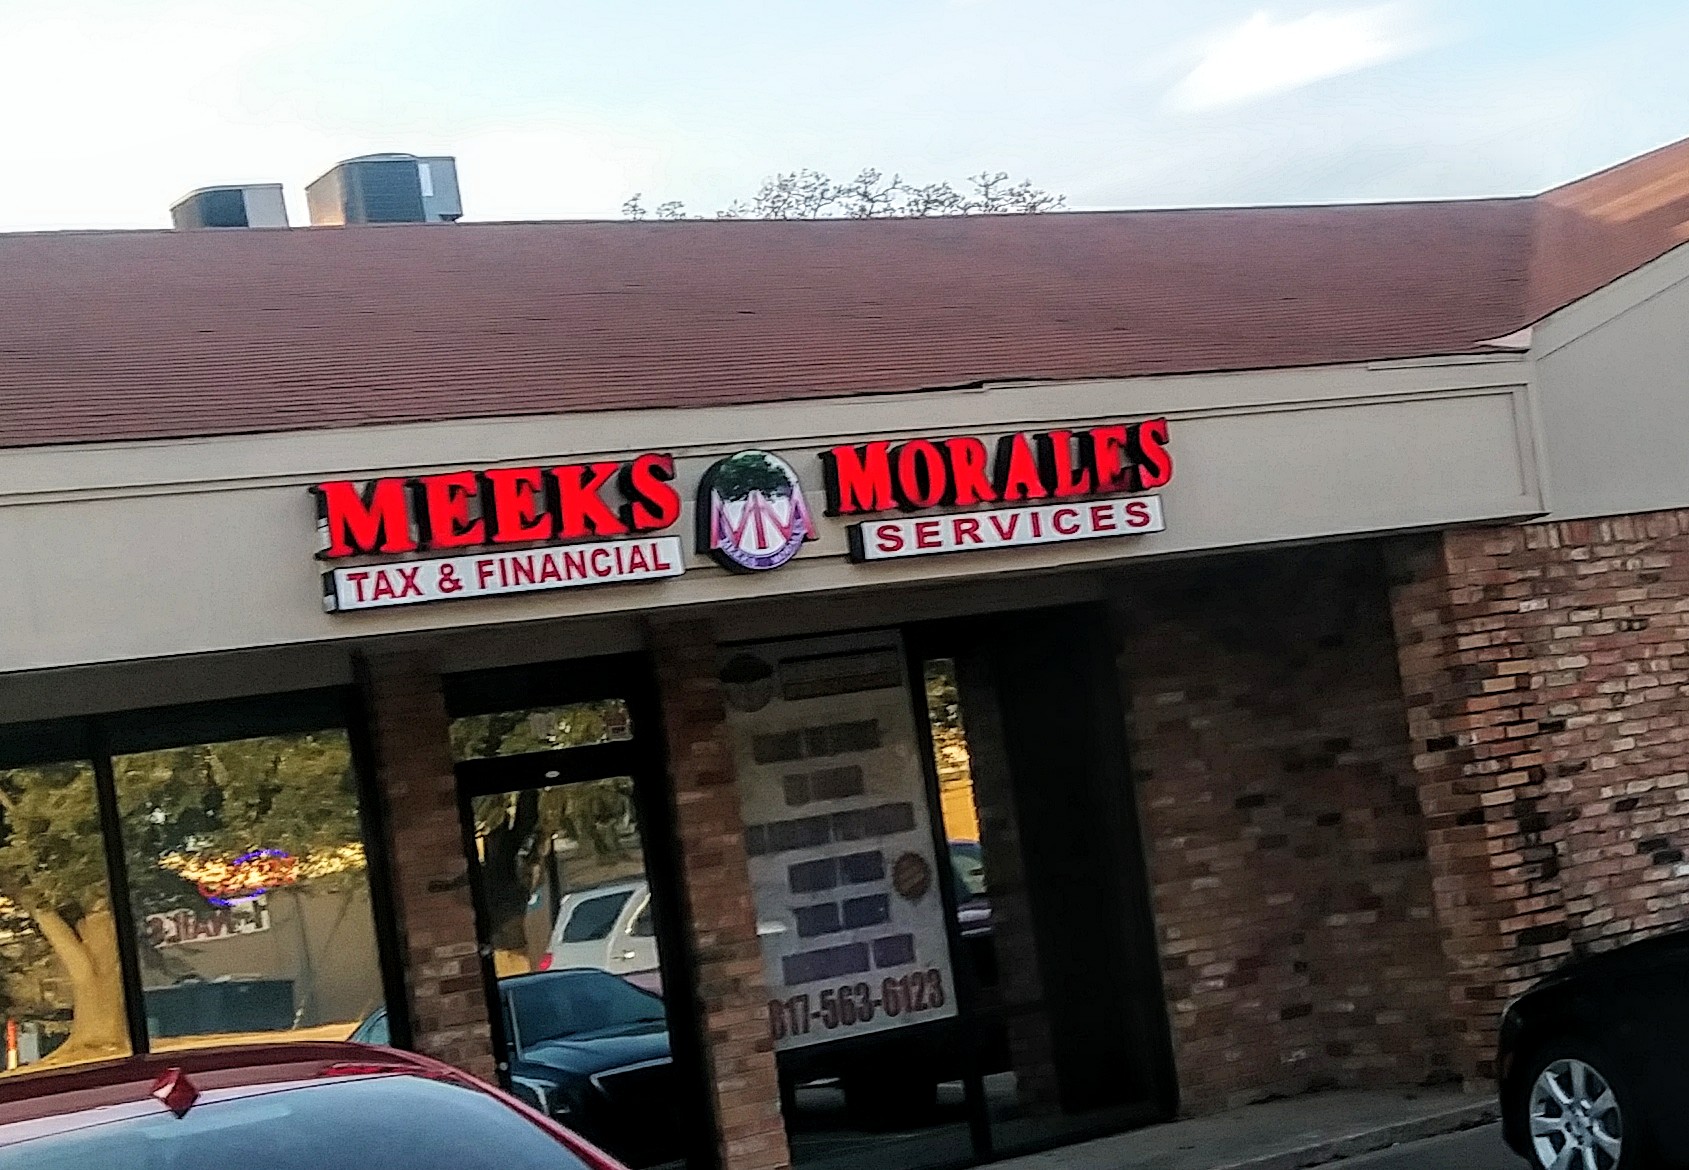 Meeks & Morales Tax & Financial Services